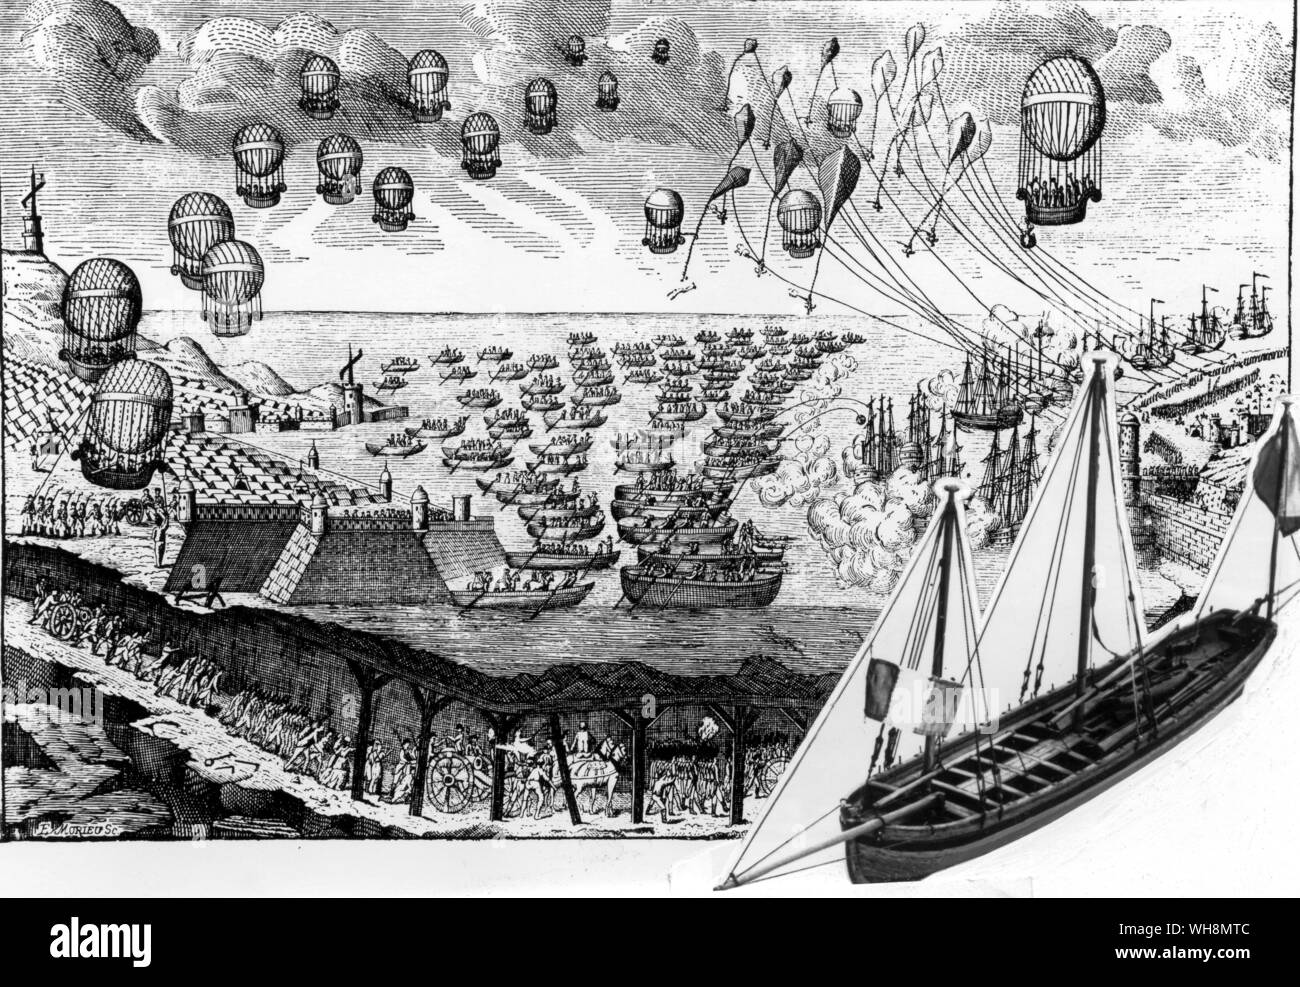 The project for the invasion of England 1803-5 - fantasy and reality. The cartoon shows the invasion army rowing itself across the Channel preceded by airborne forces in balloons, while more troops pass through a Channel tunnel. The insert shows a peniche, one of the specially-designed but unseaworthy invasion craft. Mansell Collection, (insert) Musee de la marine, paris Stock Photo